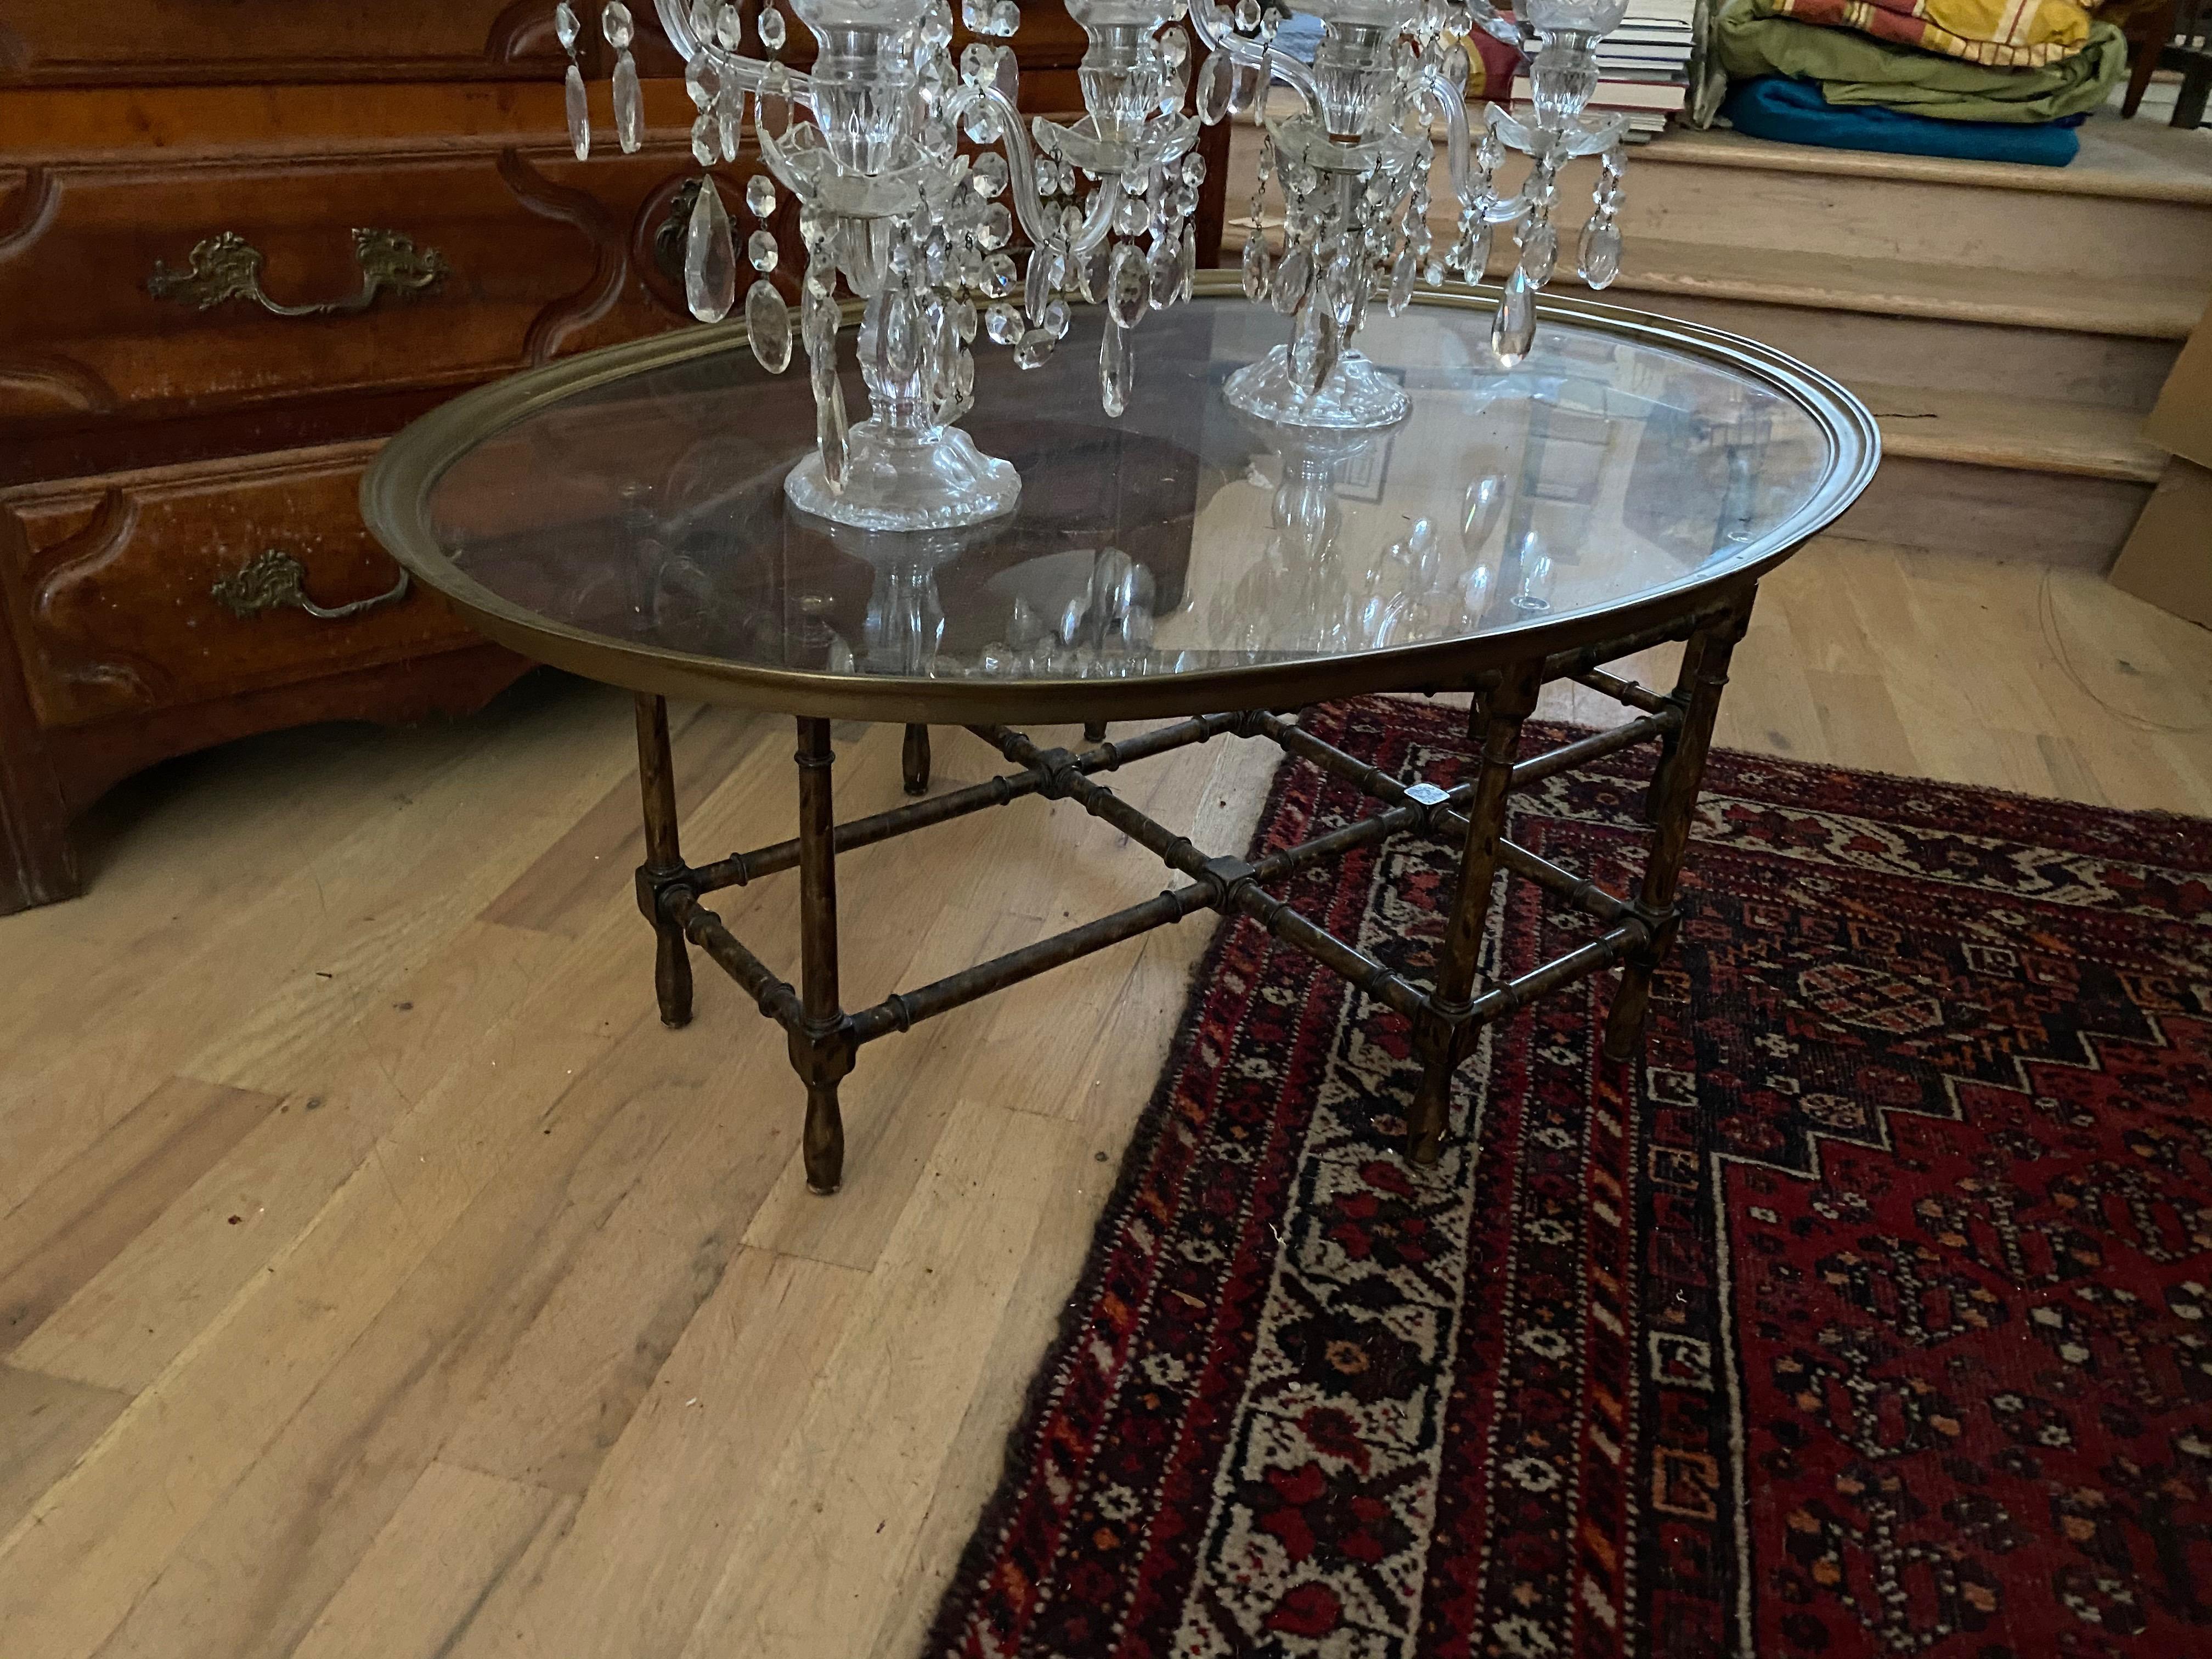 20th Century Louis XVI Style Coffee Table with Marble Top.  Lovely Old Worn Patina/Finish.